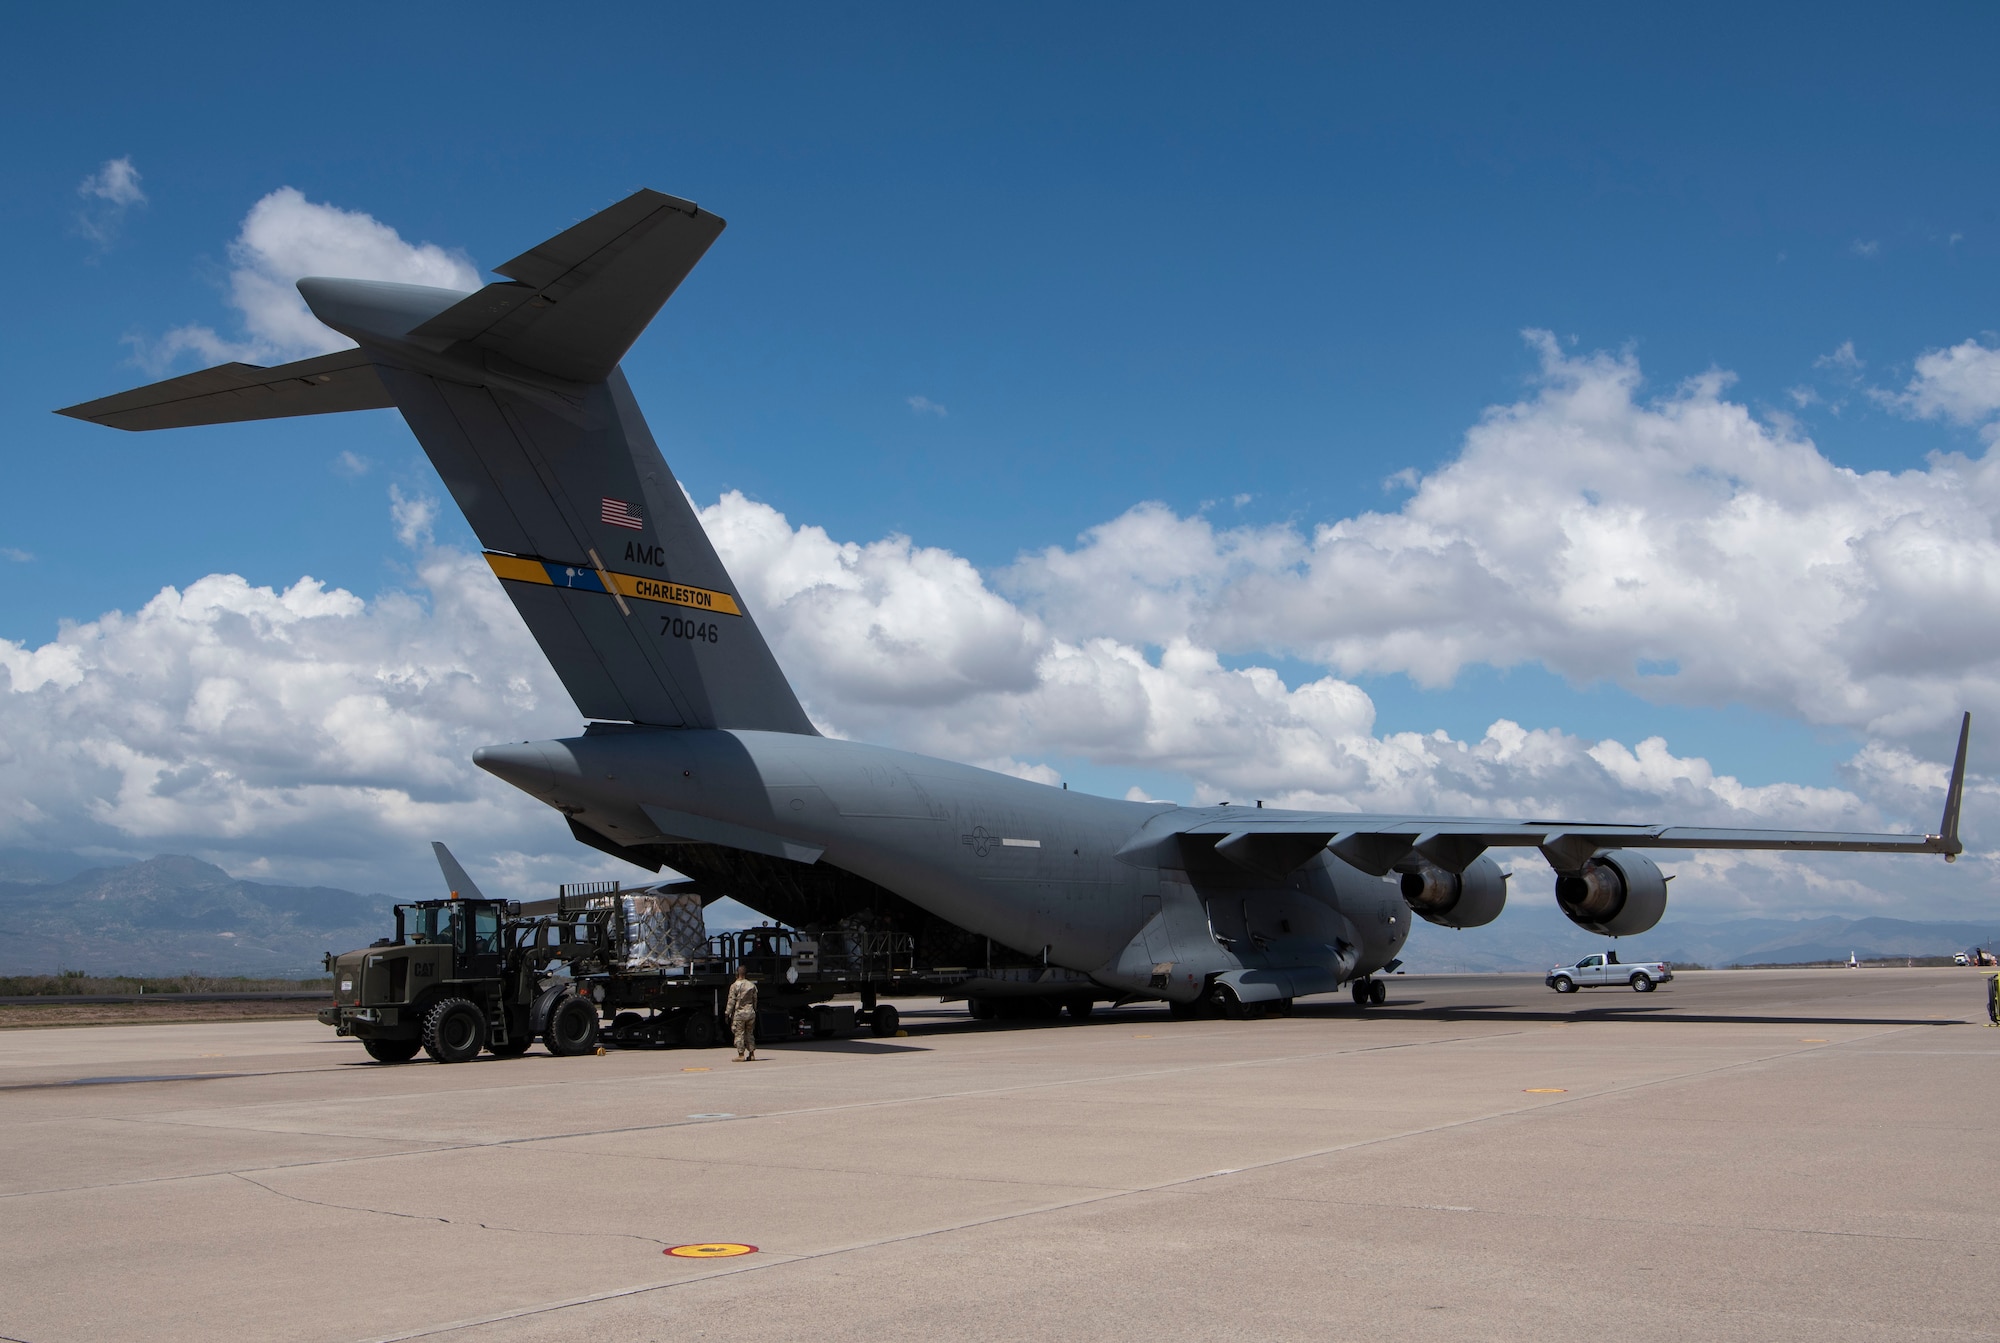 Humanitarian cargo delivered via a Charleston C-17 Globemaster III aircraft by an Air Force Reserve crew is offloaded at Soto Cano Air Base, Honduras, as part of a weekend combined aircrew training and delivery mission in Central America, Feb. 13, 2022. Cargo was donated by charities and outreach organizations throughout the U.S. and was delivered as part of the Denton Cargo Program, which allows for humanitarian donations to be carried aboard U.S. military aircraft on a space-available basis. (U.S. Air Force photo by Lt. Col. Wayne Capps)